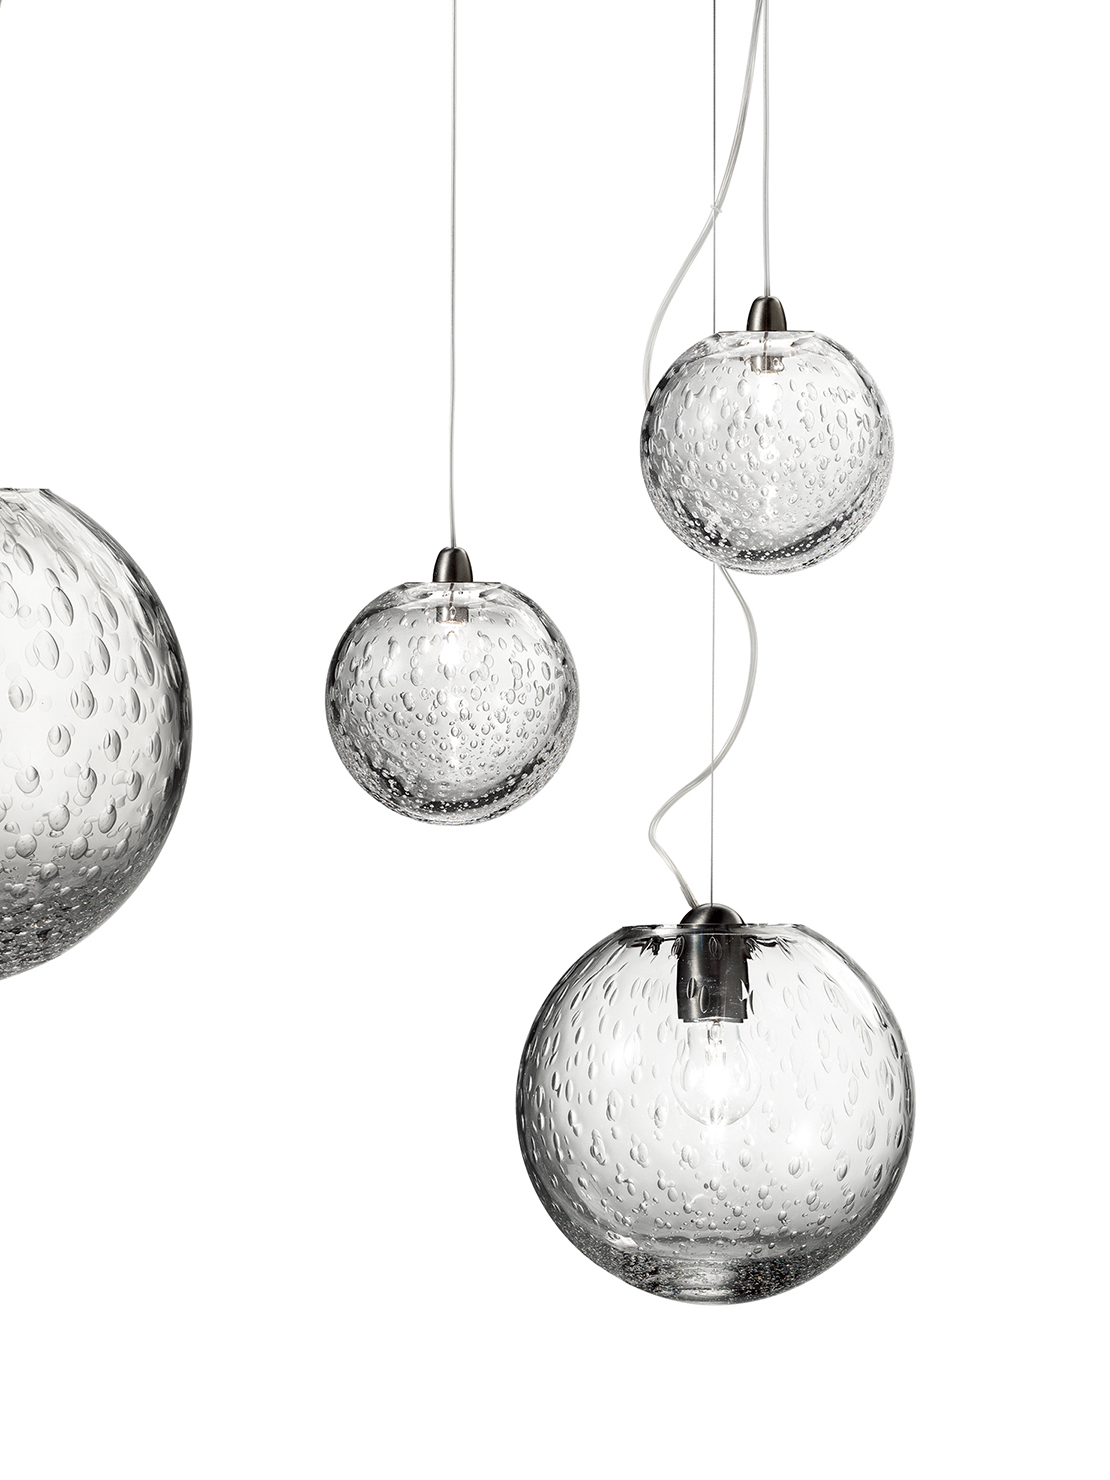 Bolle Pendant by Vistosi at